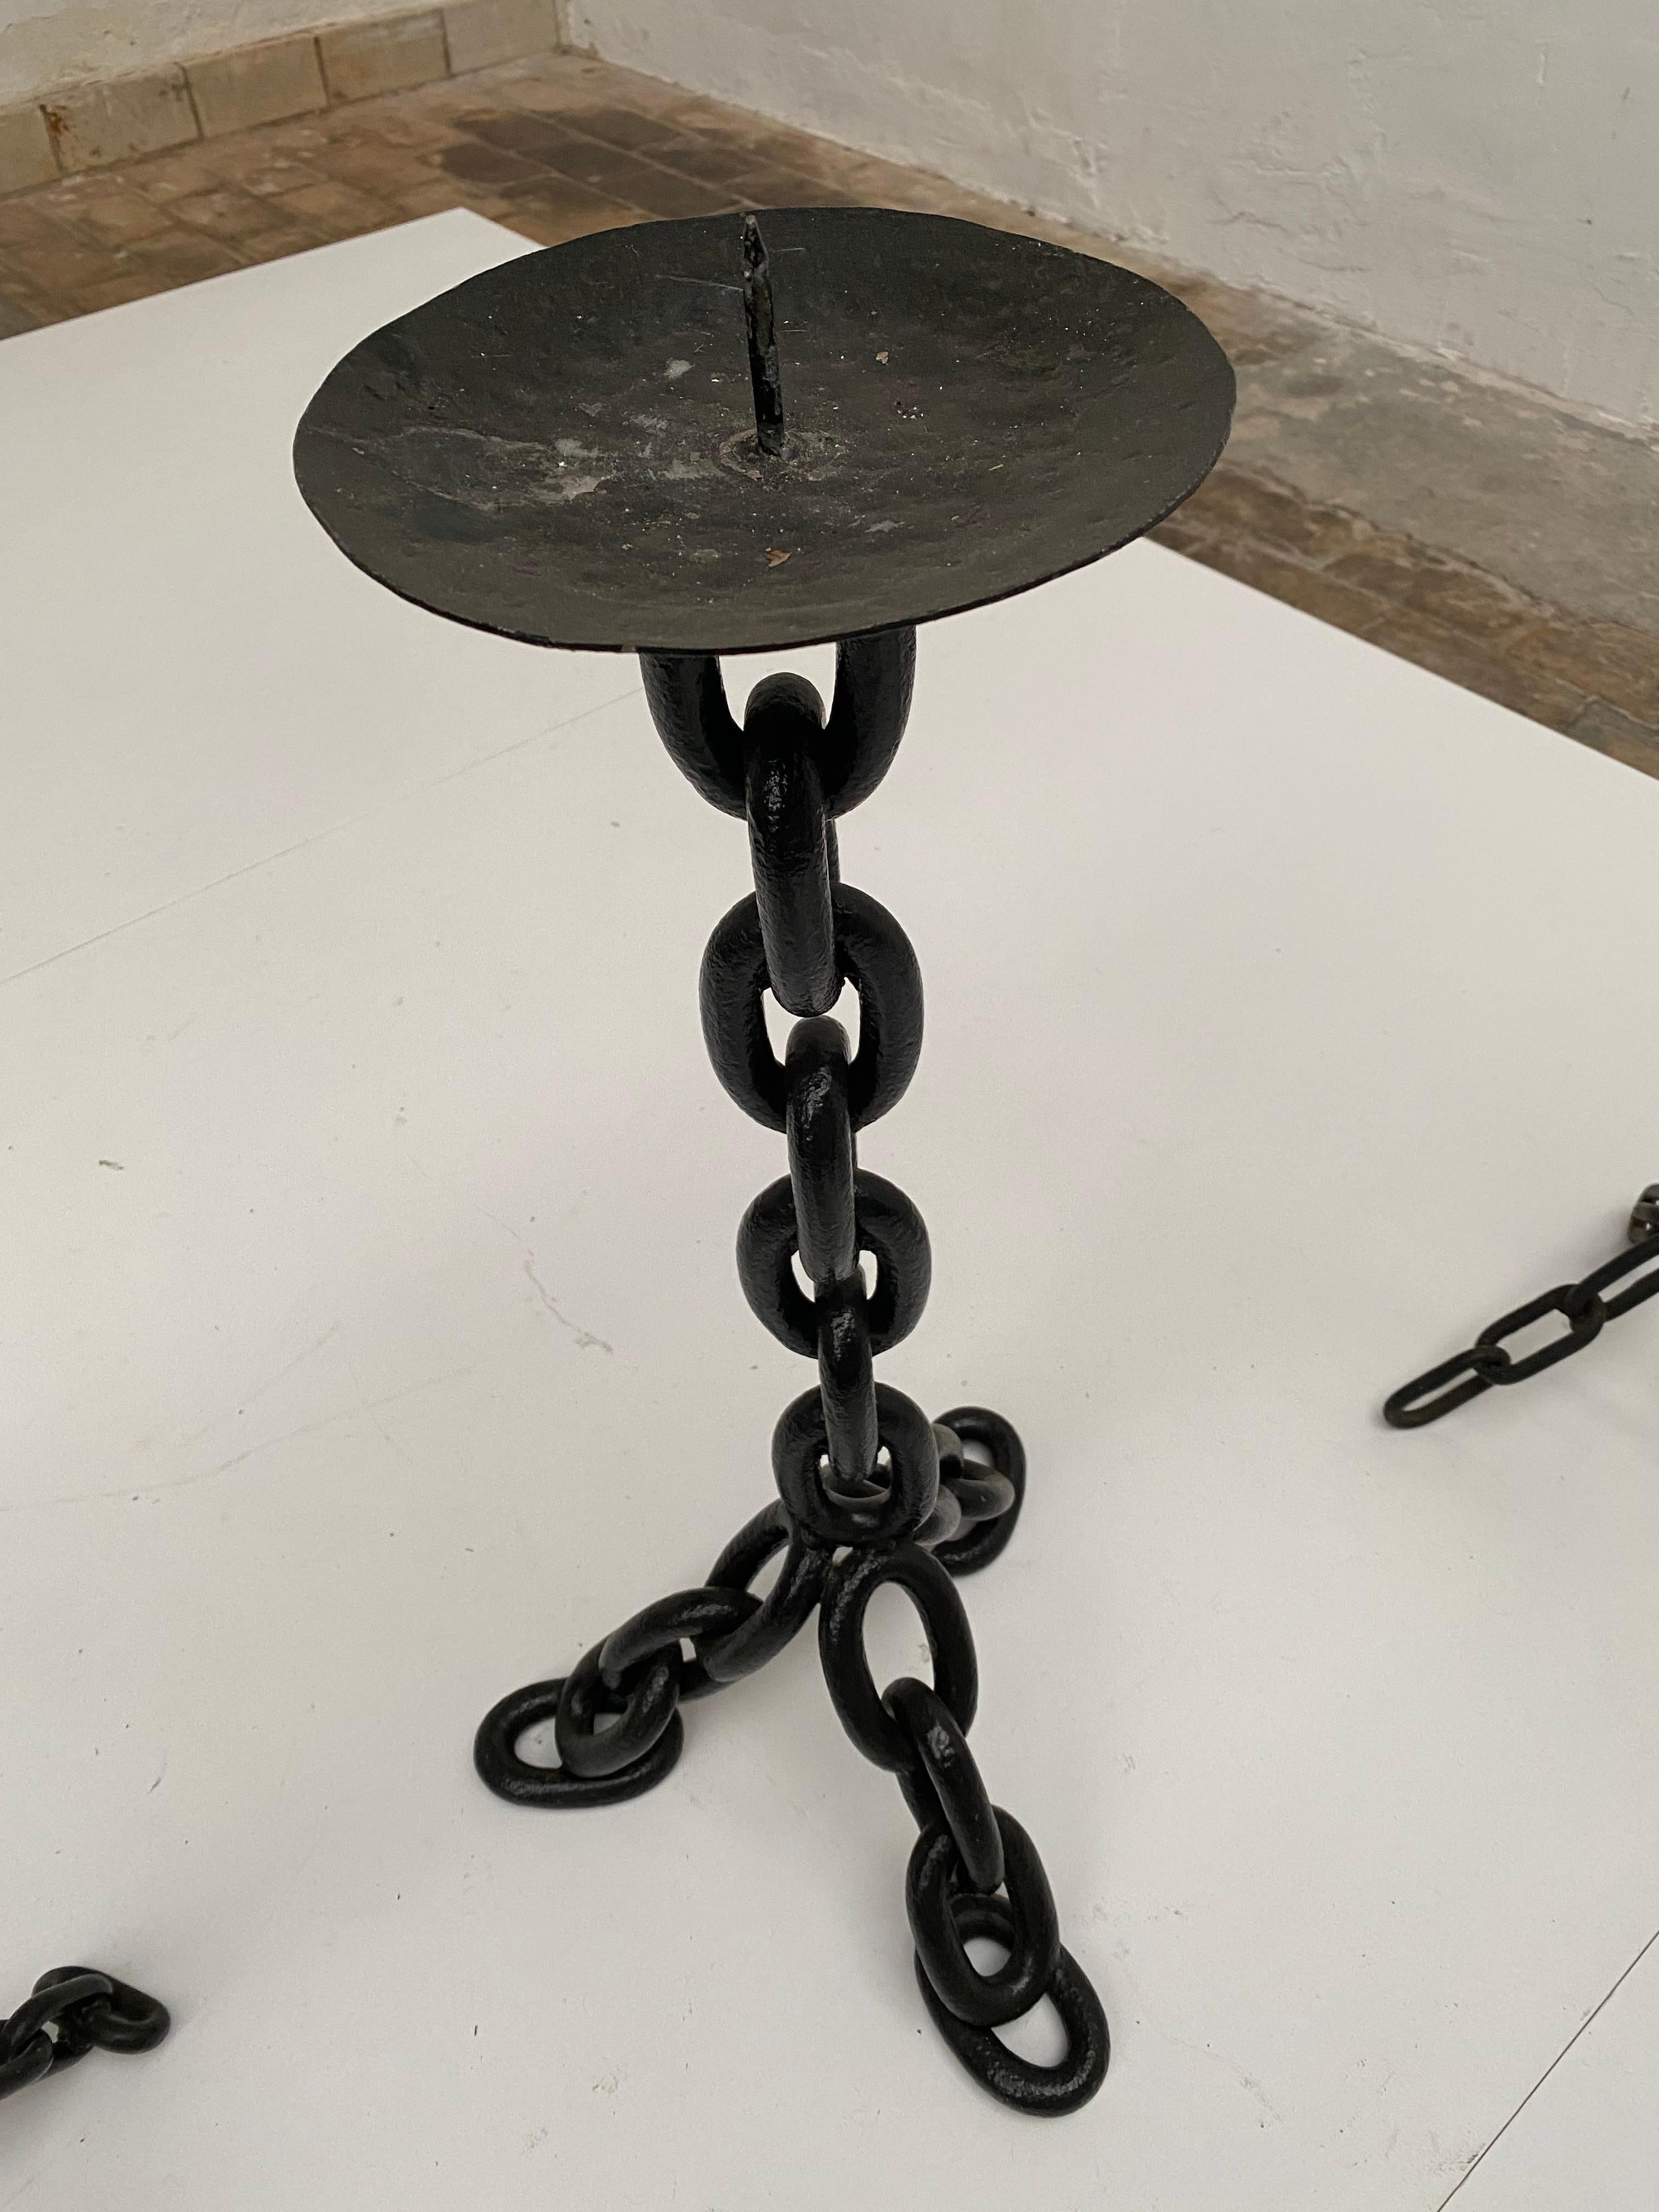 Wrought Iron Brutalist Collection of Welded Iron Chain Candeholders 1970s, The Netherlands For Sale